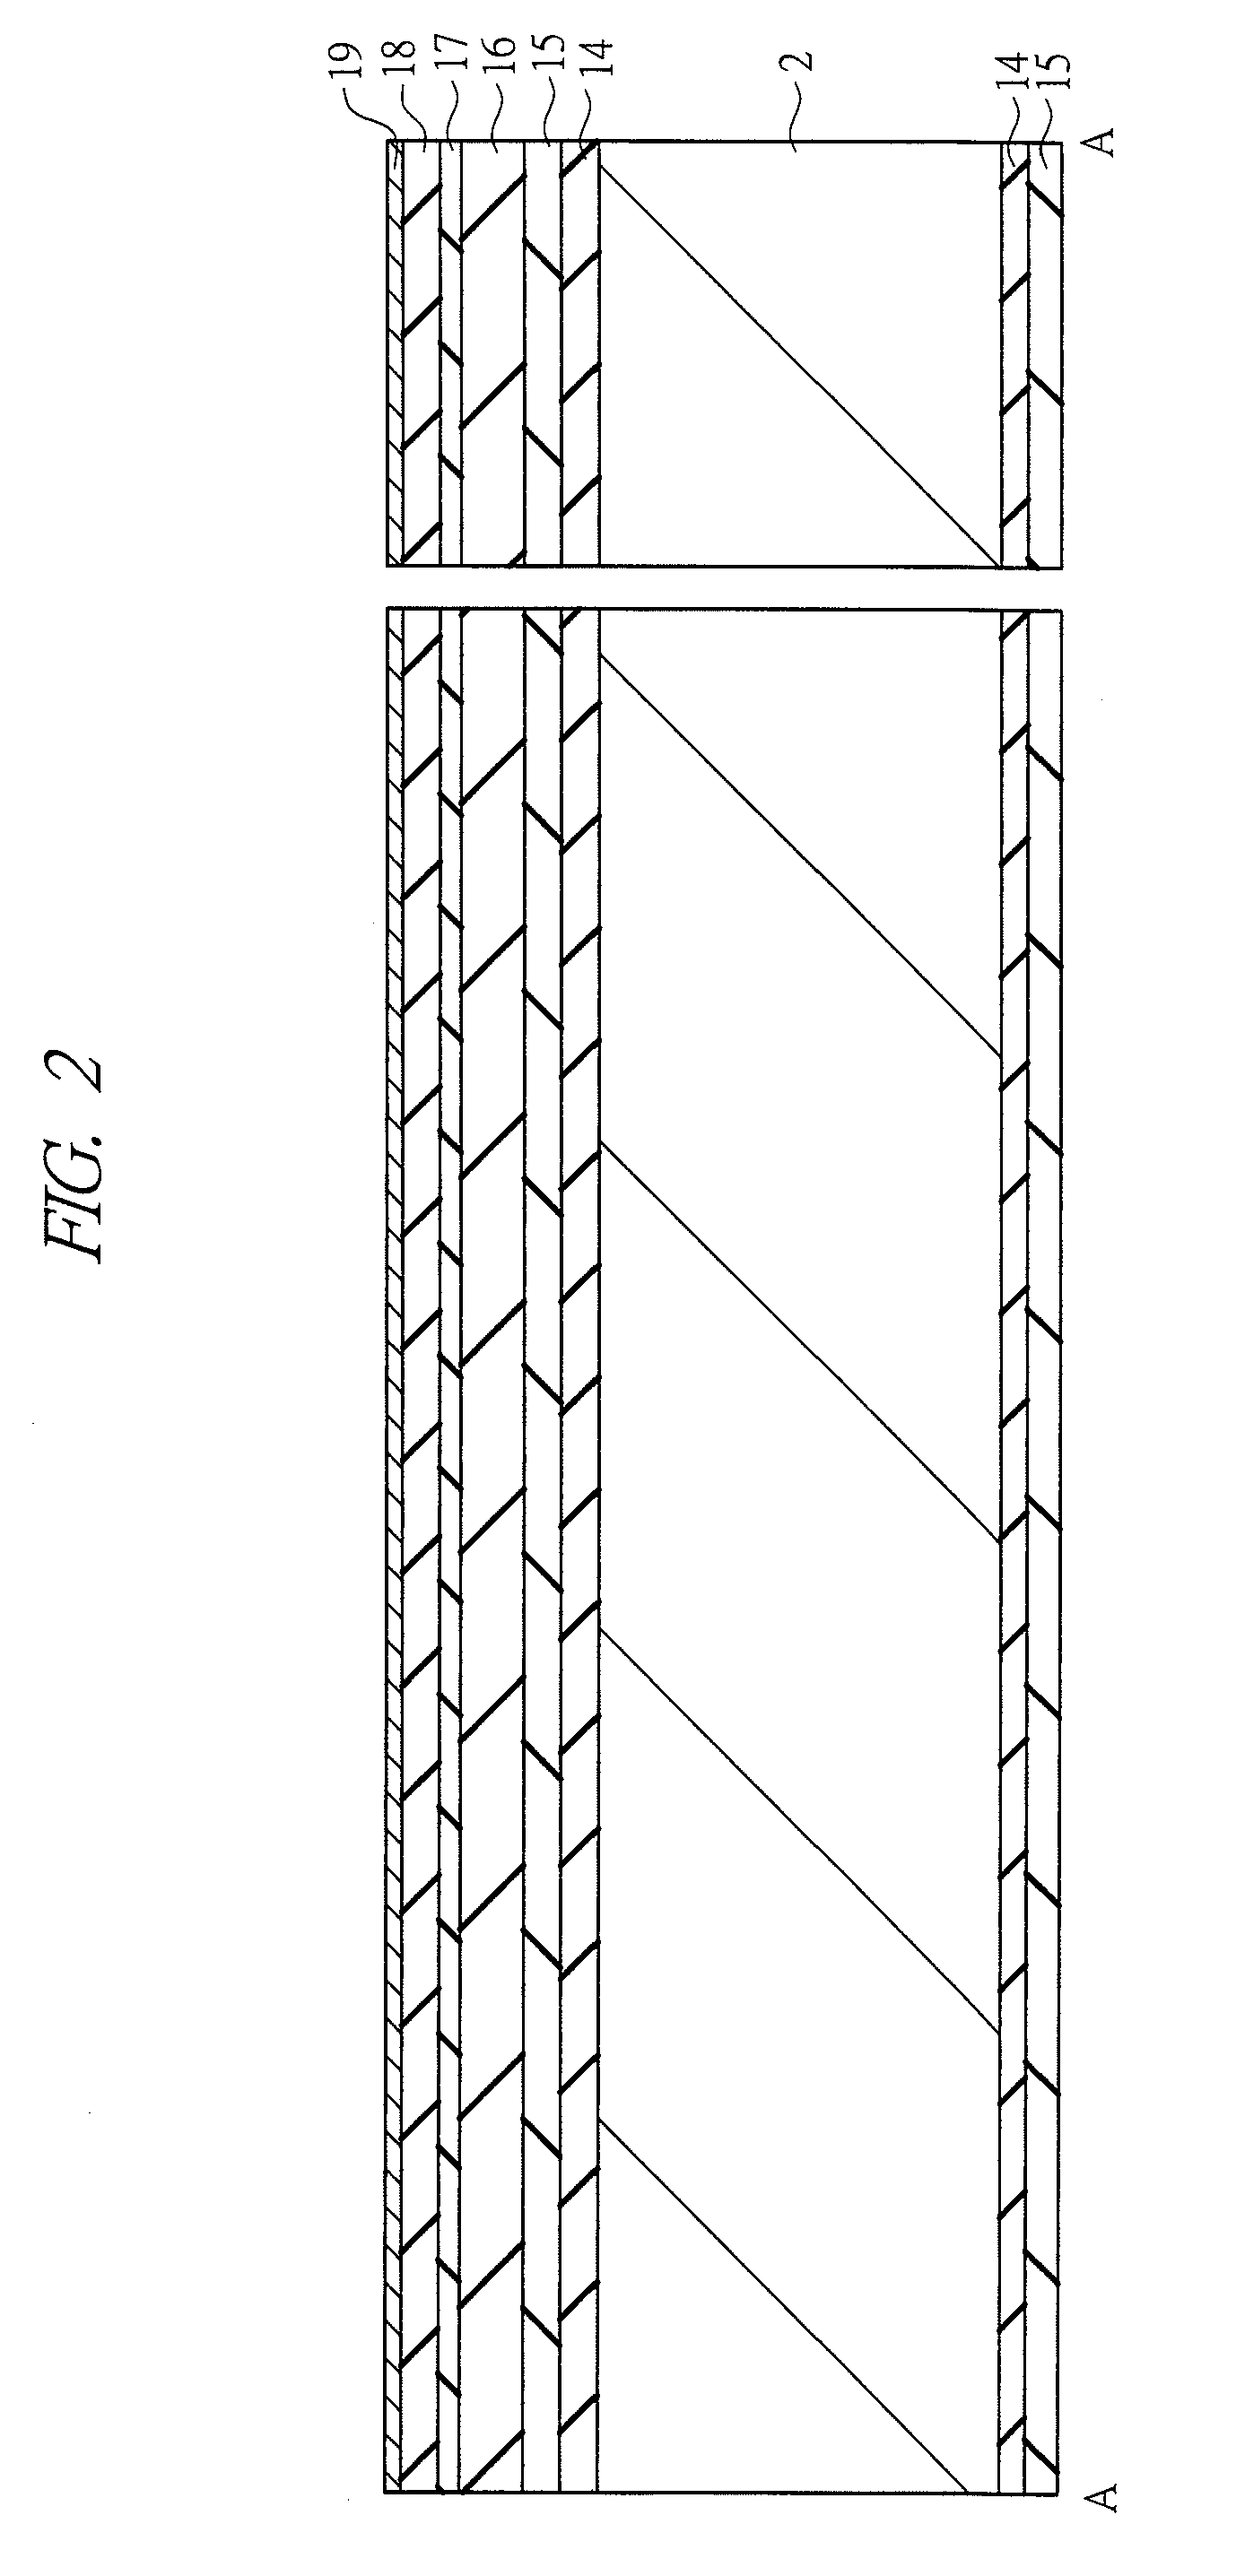 Thermal fluid flow sensor having stacked insulating films above and below heater and temperature-measuring resistive elements